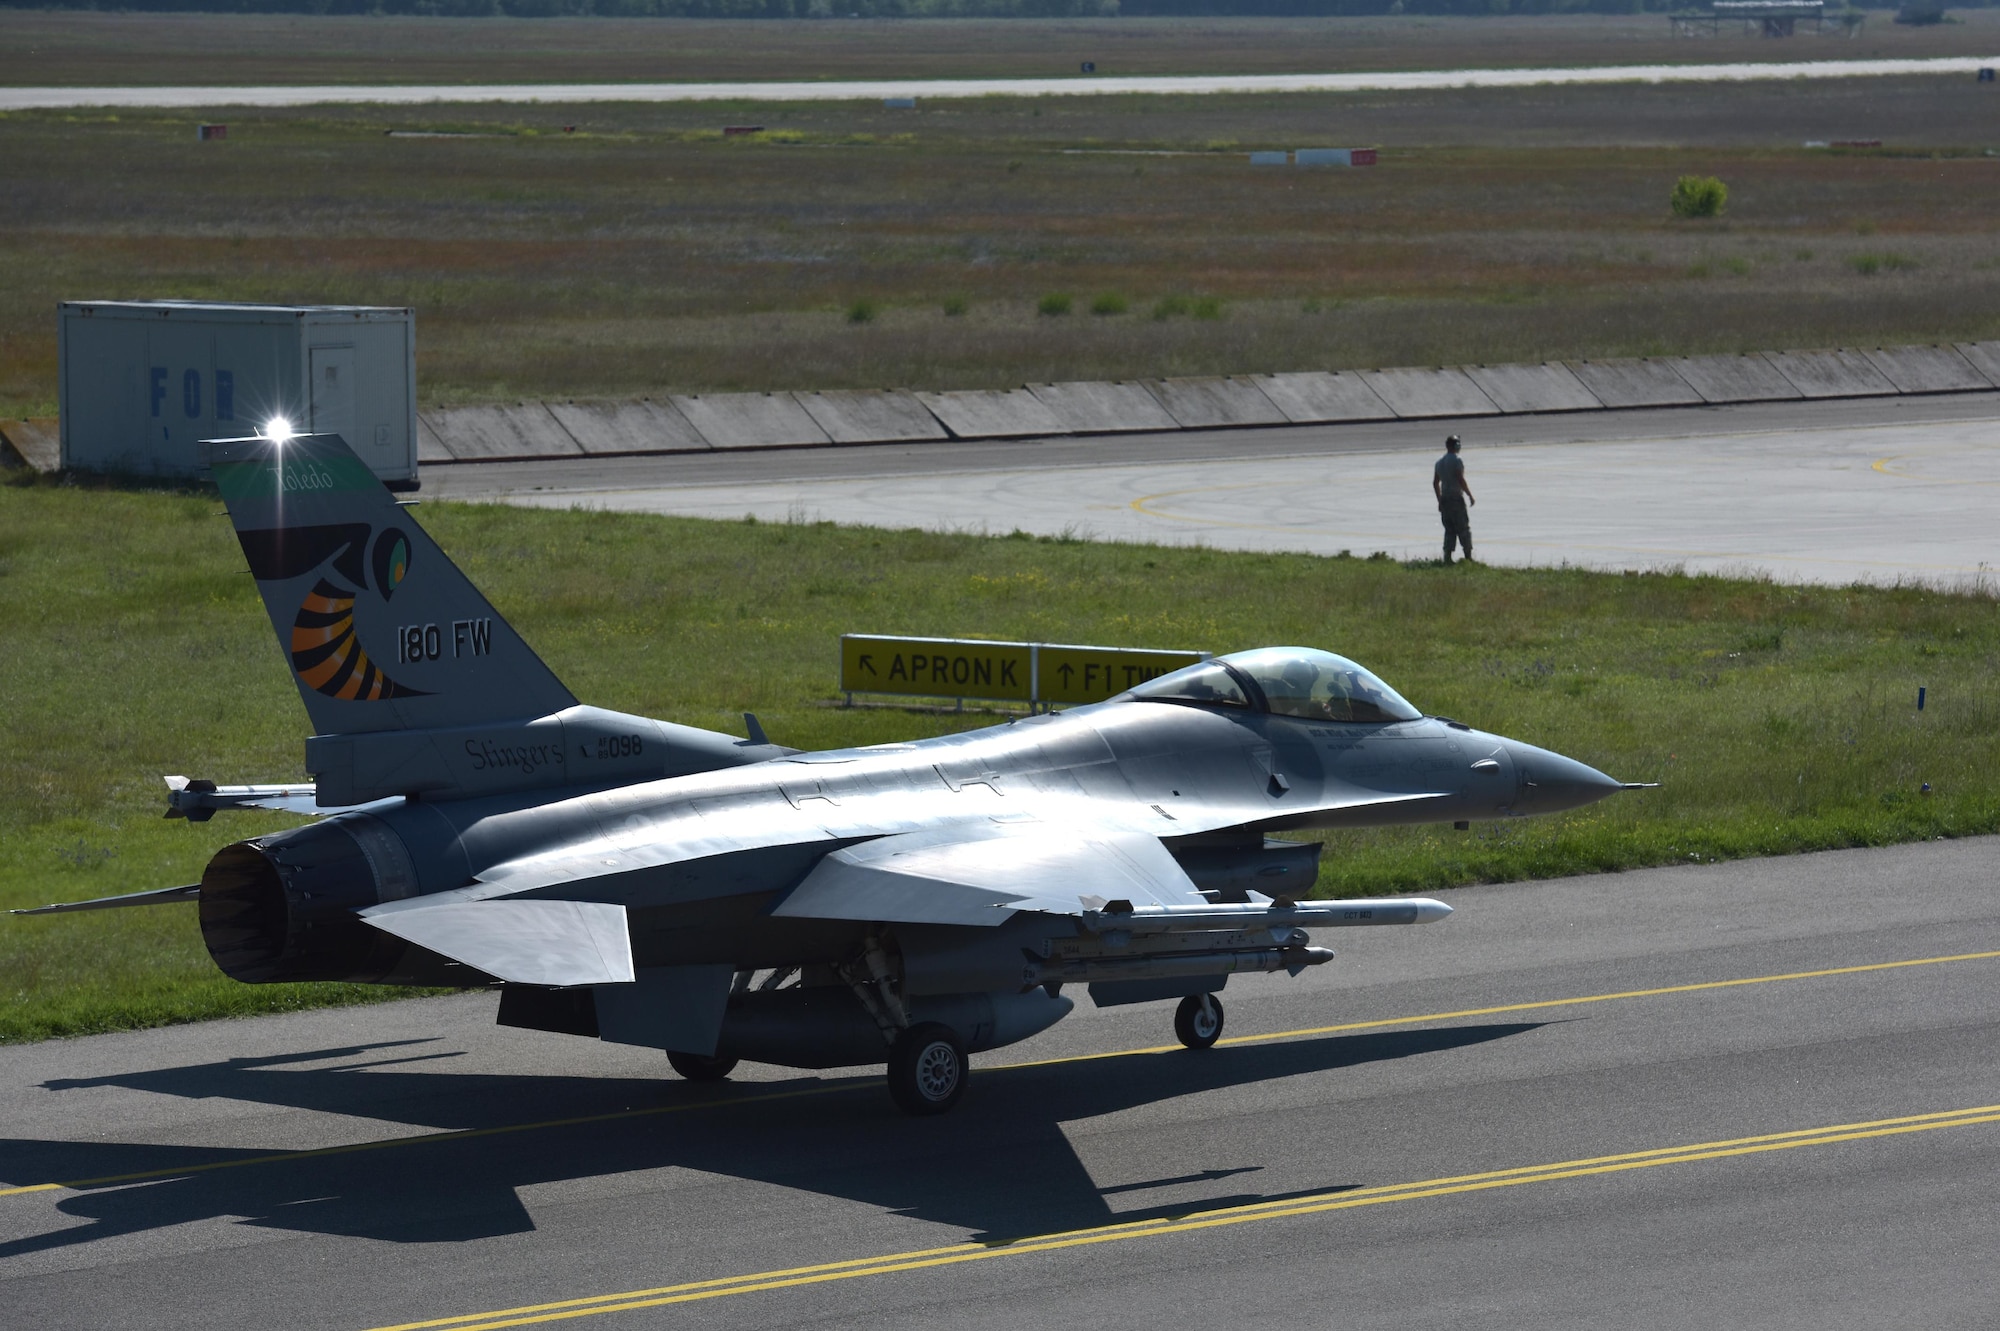 An F-16 Fighting Falcon assigned to the Ohio Air National Guard’s 180th Fighter Wing, taxies at Kecskemet Air Base in Hungary, May 26, 2017. More than 150 Airmen and eight F-16s from the 180FW deployed to the air base to participate in exercise Load Diffuser 17 at the Hungarian Air Base from May 22 to June 9, 2017. Load Diffuser is a Hungarian Air Force-led, multinational flying exercise between NATO allies and partner nations. Multinational training engagements such as these strengthen our relationships, help us maintain joint readiness and interoperability, and reassure our European allies and partners. The U.S. and Hungary, as NATO allies, share a commitment to promote peace and stability, and seek opportunities to continue developing their relationship. Air National Guard photo by Senior Master Sgt. Beth Holliker.